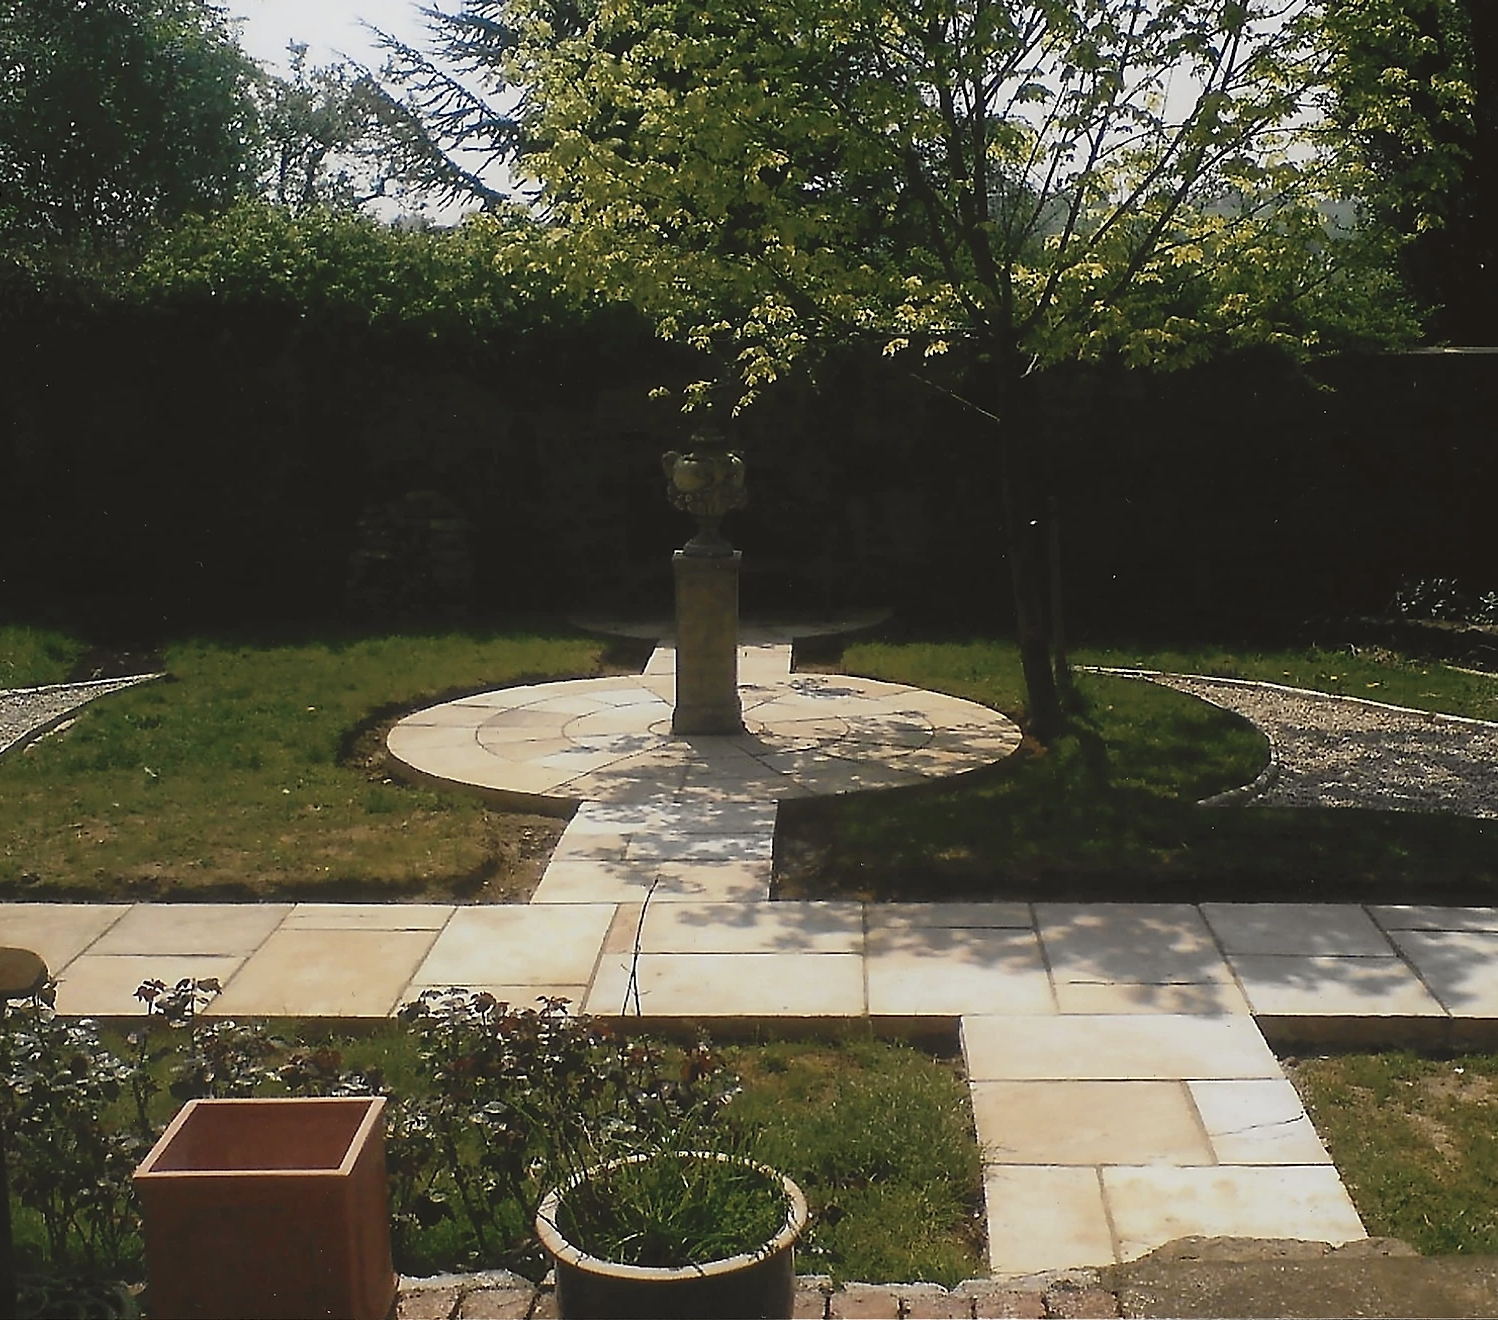 cotsworl-landscaping-works-patio-01